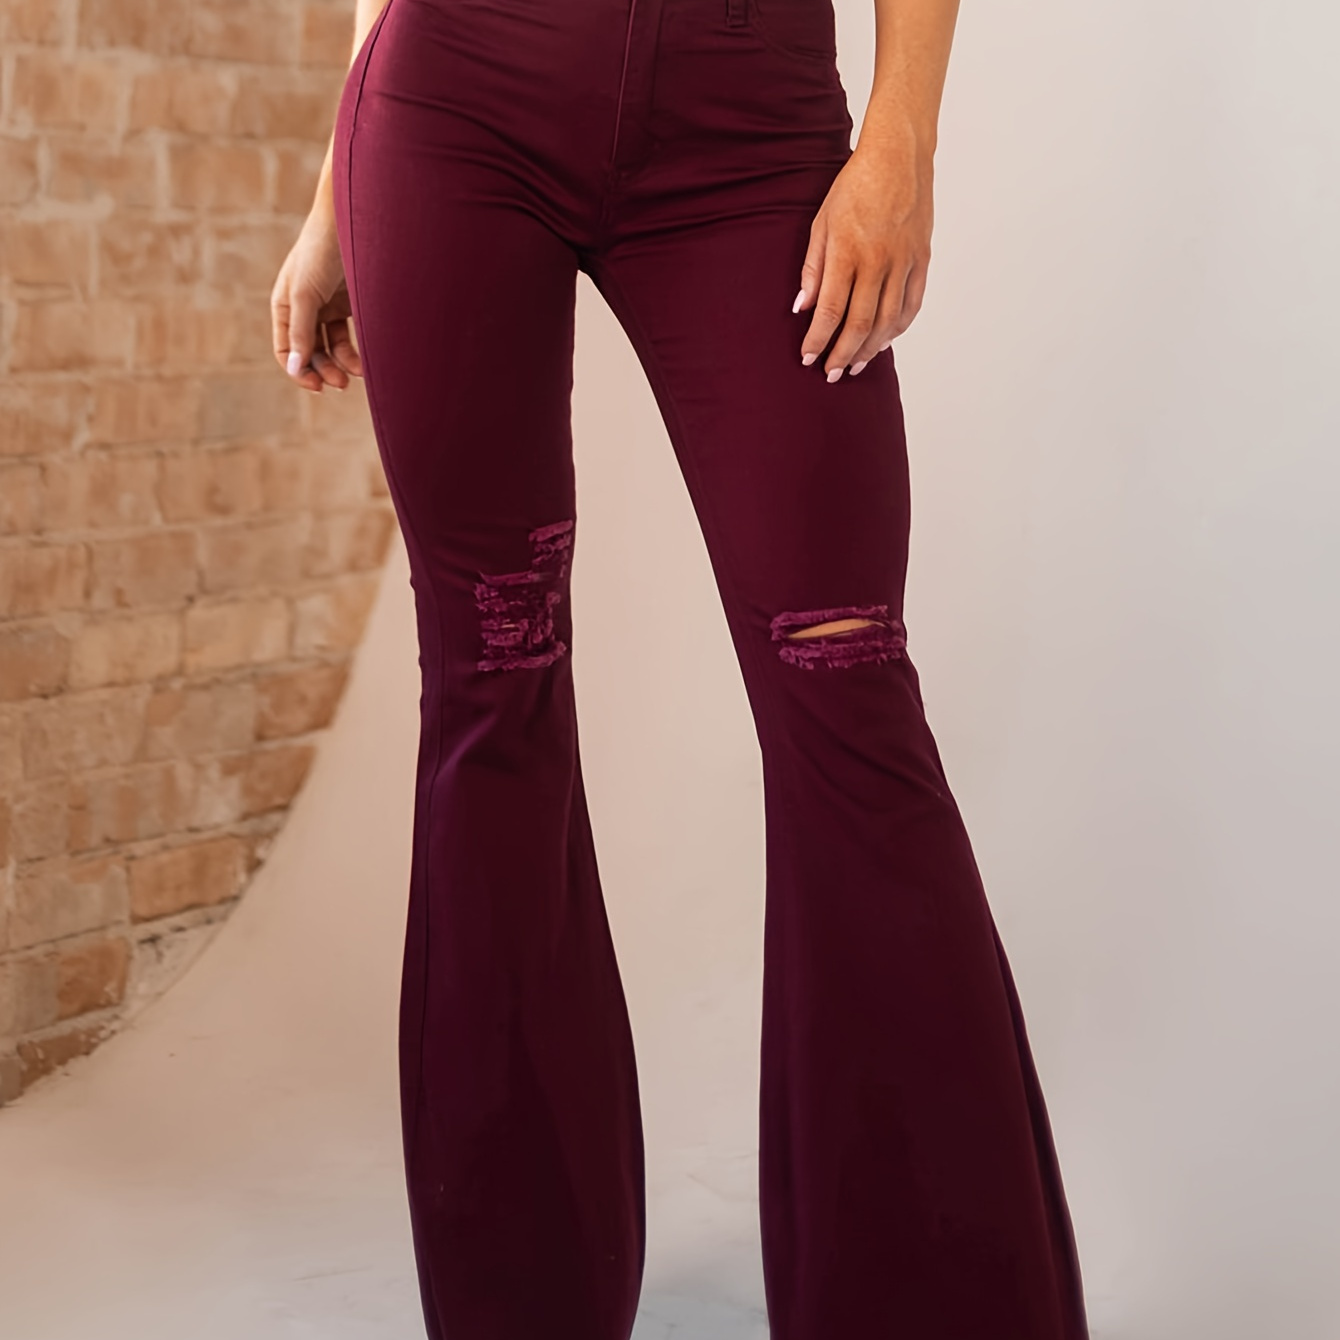 

Burgundy Ripped Holes Bell Bottom Jeans, Mid-waisted Raw Trim Loose Stretchy Flare Jeans, Women's Denim Jeans & Clothing